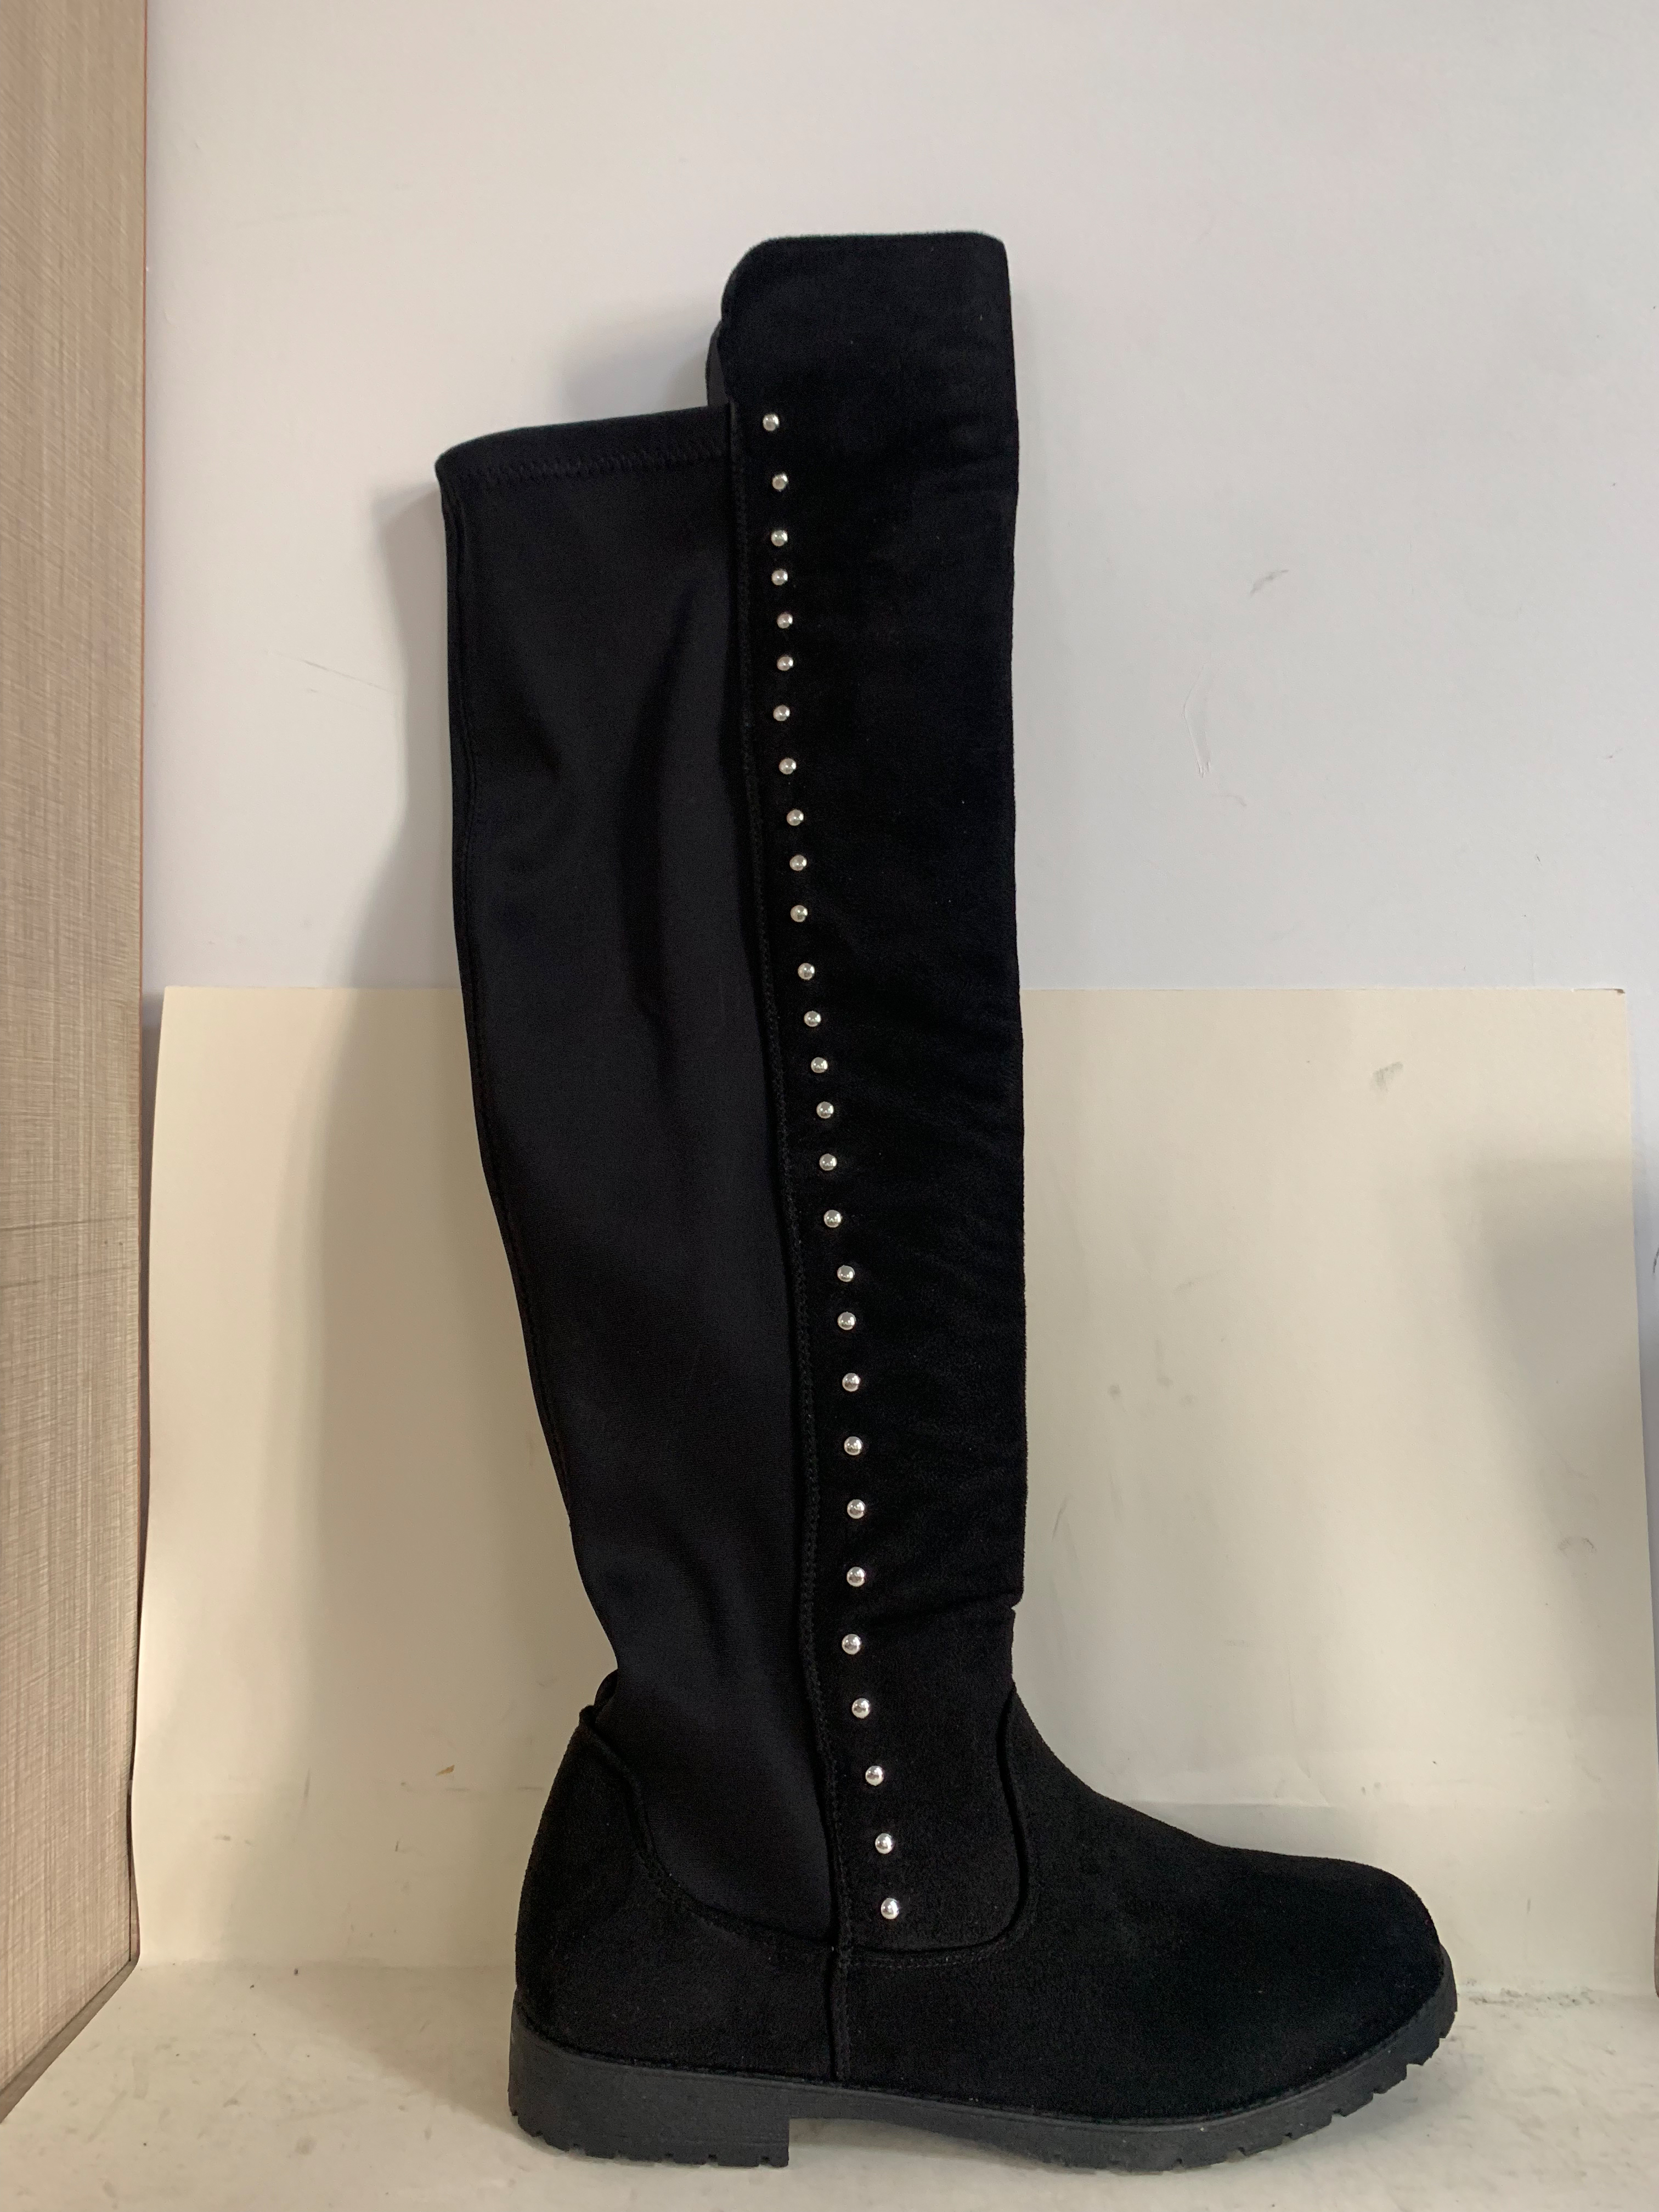 Women's Ladies' Girls' Boots Fashion High Boots